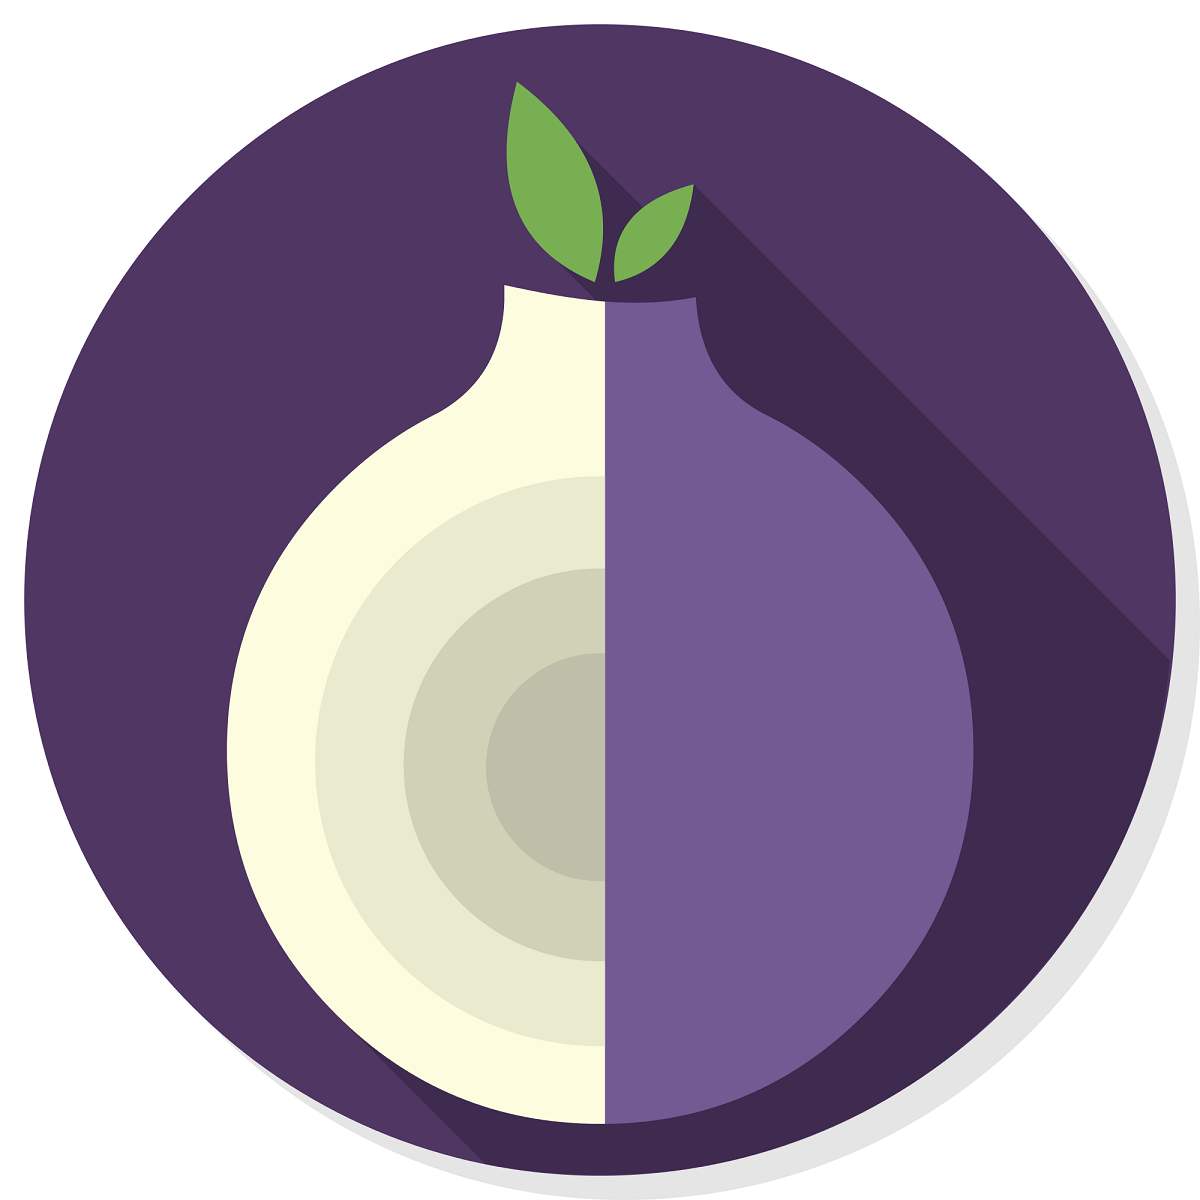 tor browser is already running